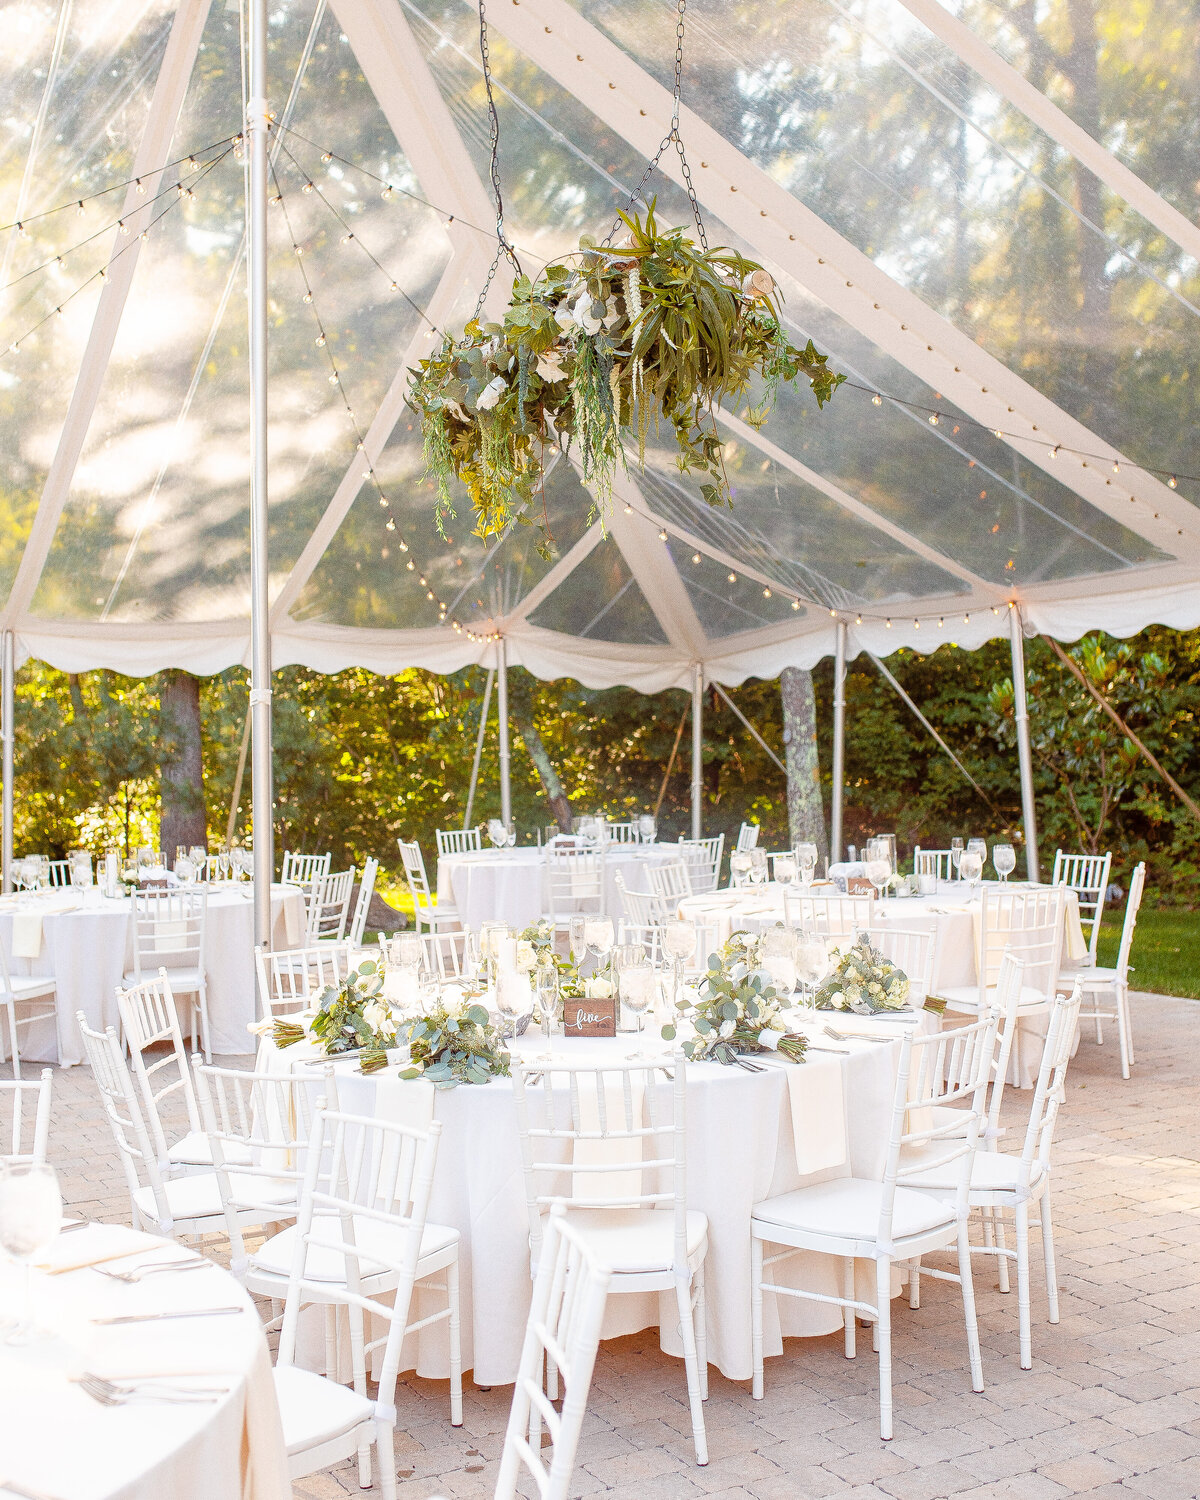 Tented wedding reception with hanging floral details at the Chatfield Hollow Inn.